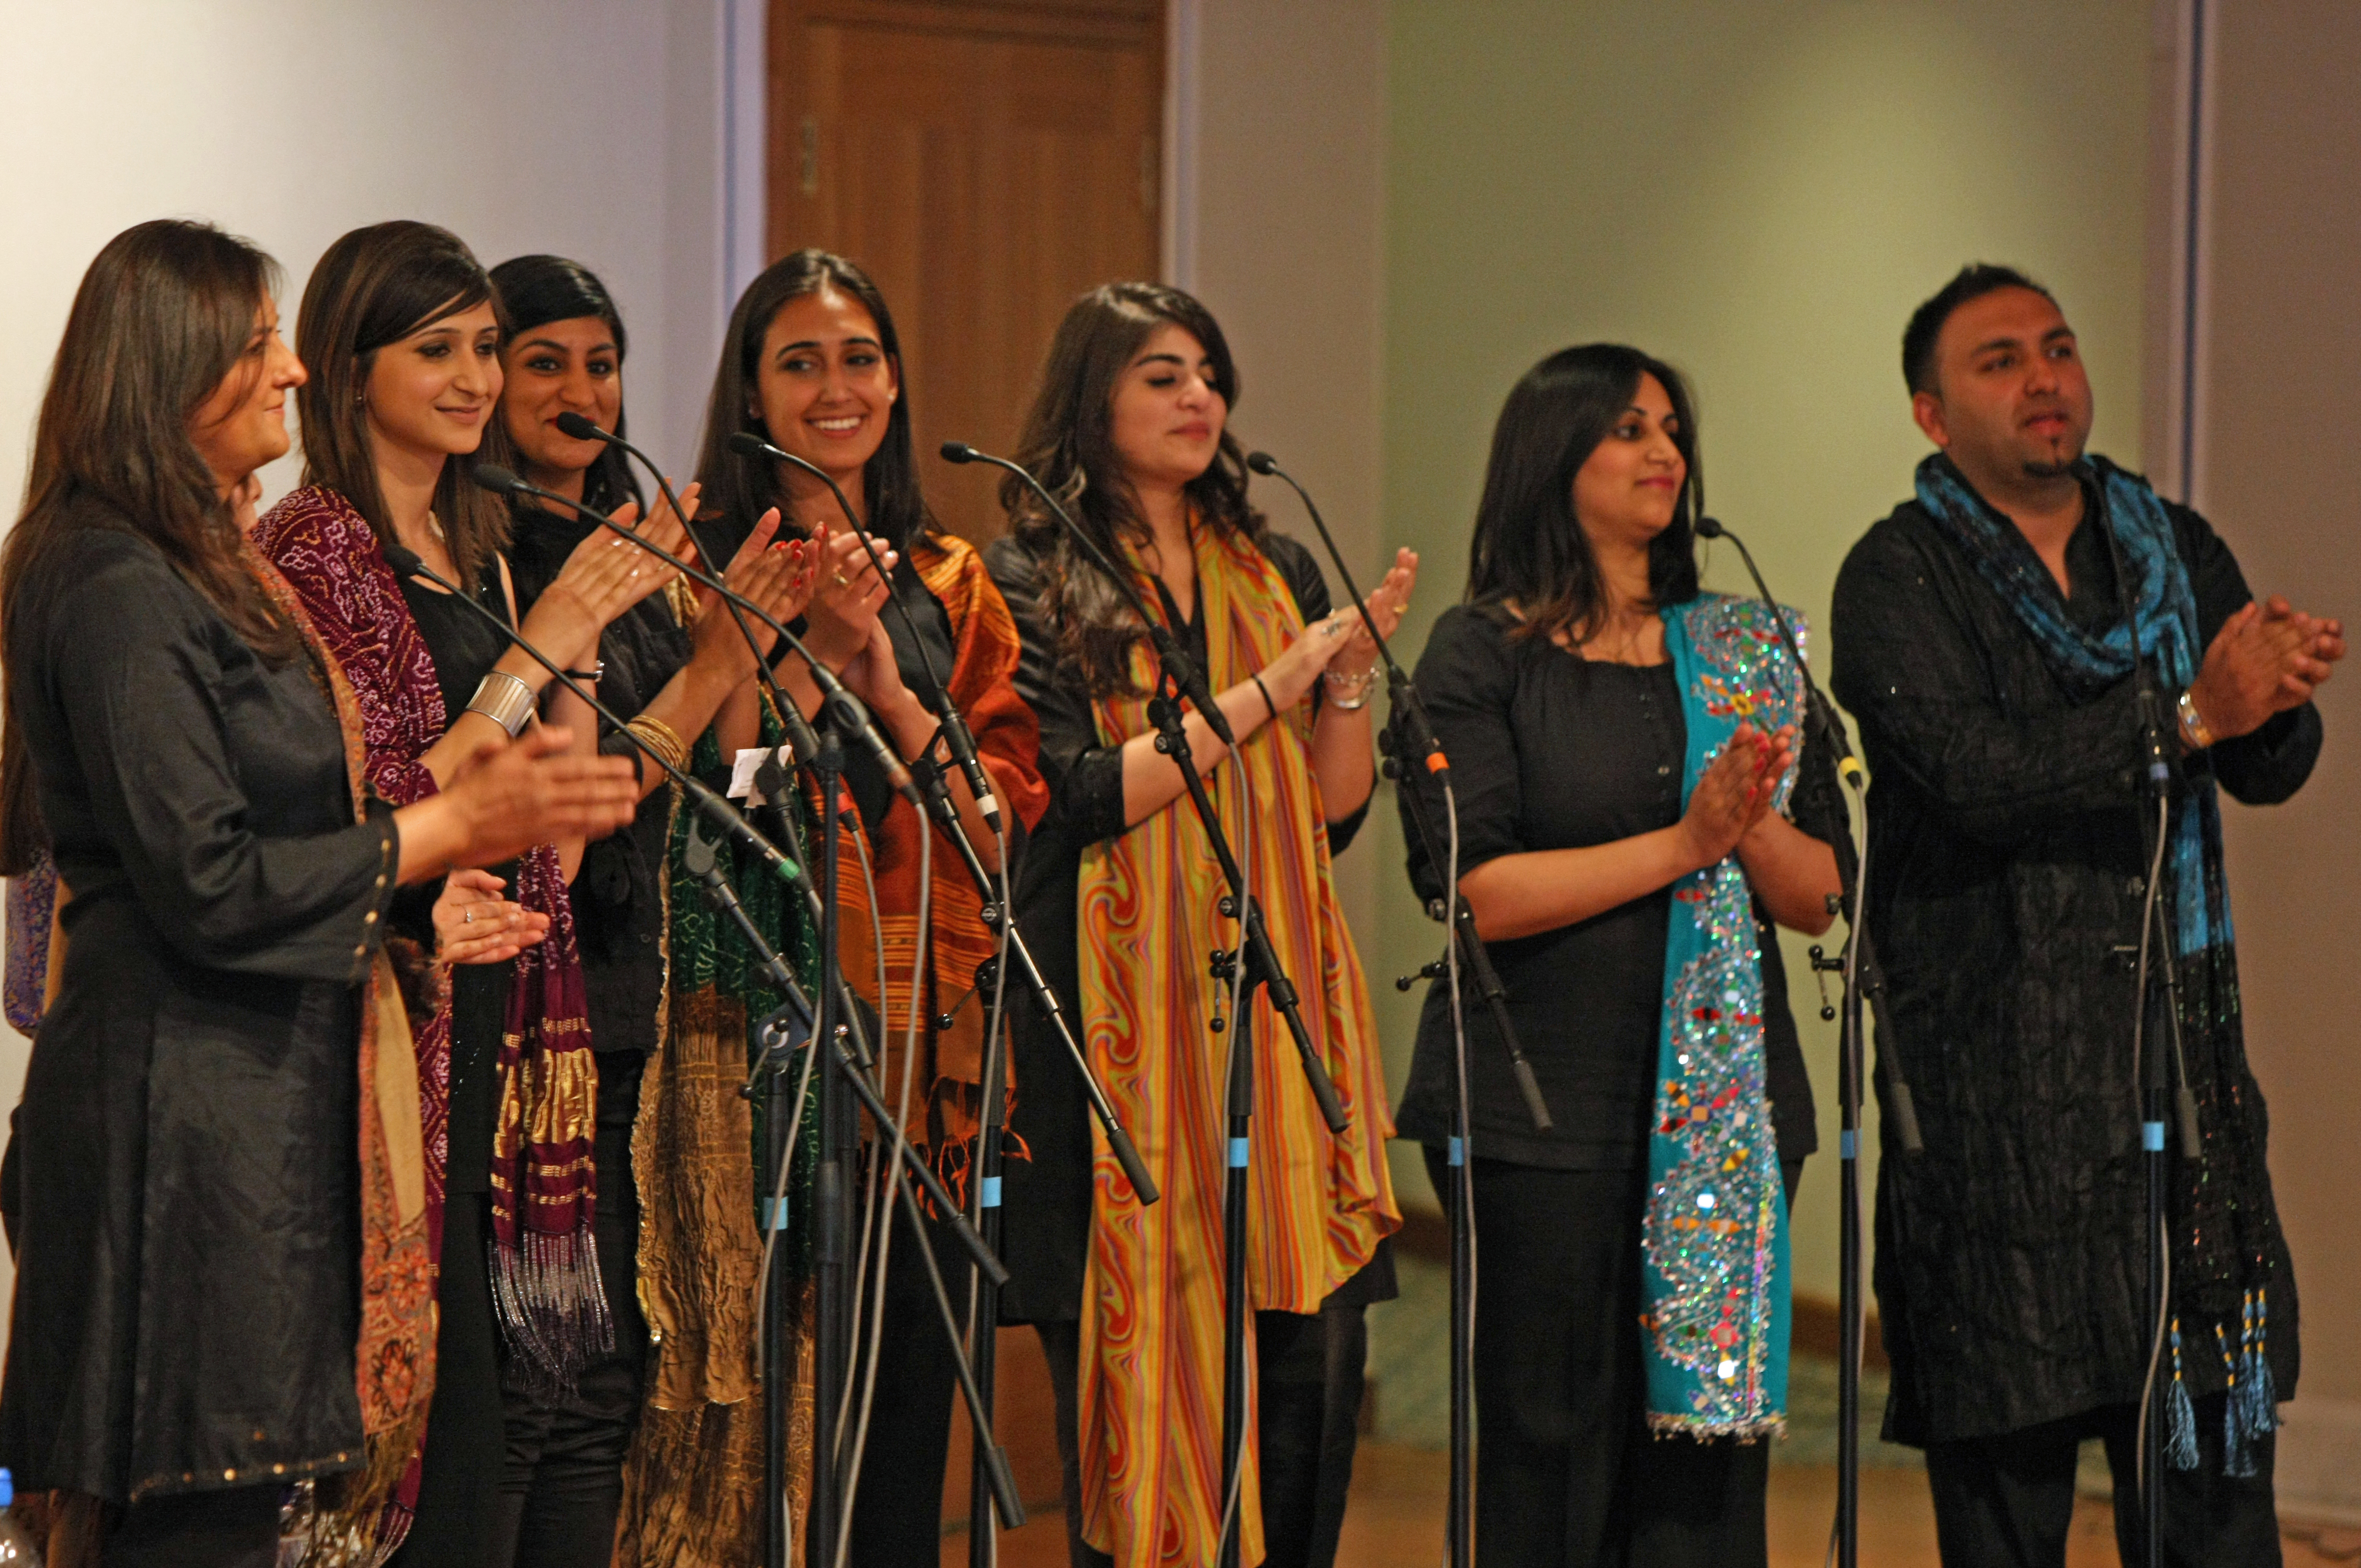 Vocalists from the Ismaili Community Ensemble recite uplifting poetry in a concert titled “Expressions of Devotion”. Photo: Courtesy of the Ismaili Council for the UK